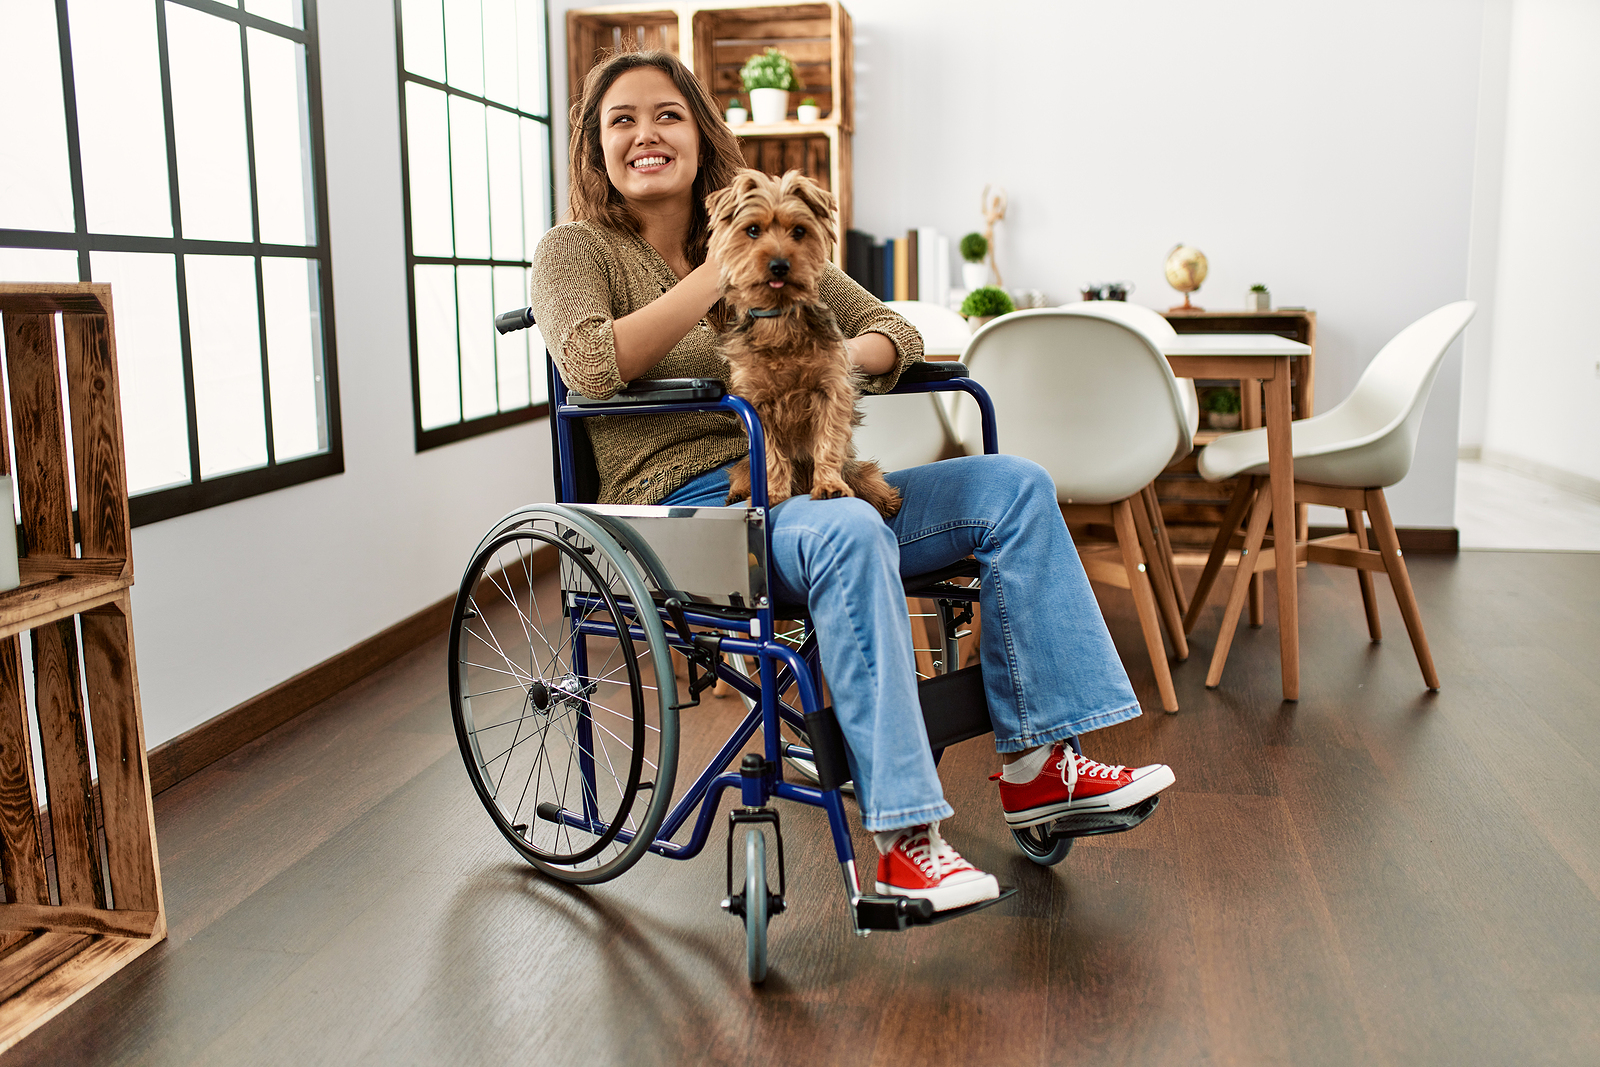 Hispanic woman in wheelchair holding cute dog in home made accessible by SMART home appliances Wilcox DC